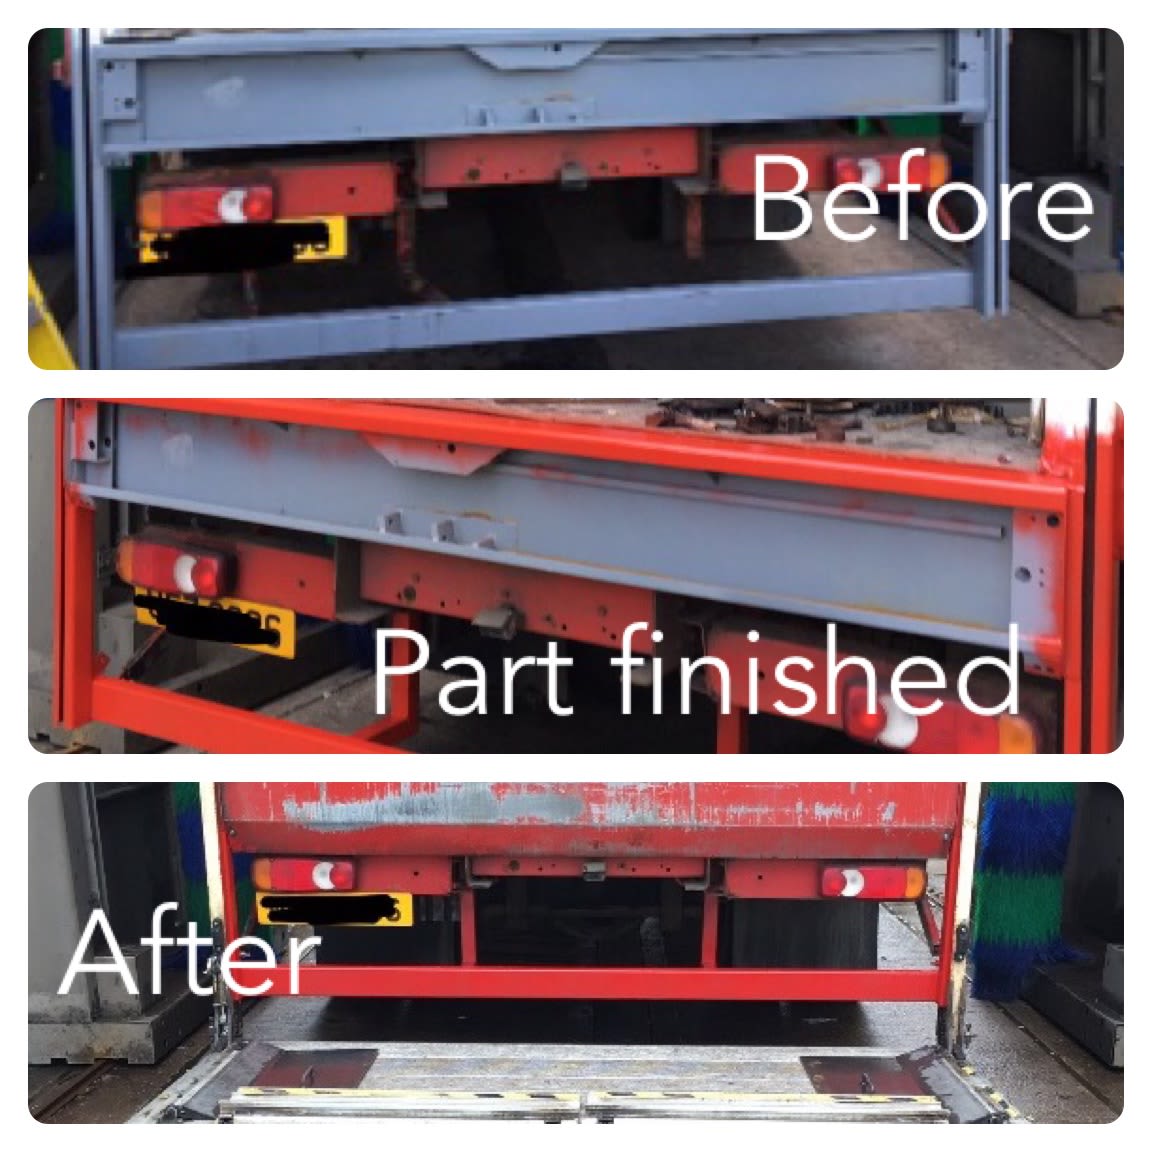 Indy-Go Tail Lift Repairs Ltd Sutton Coldfield 07552 355693